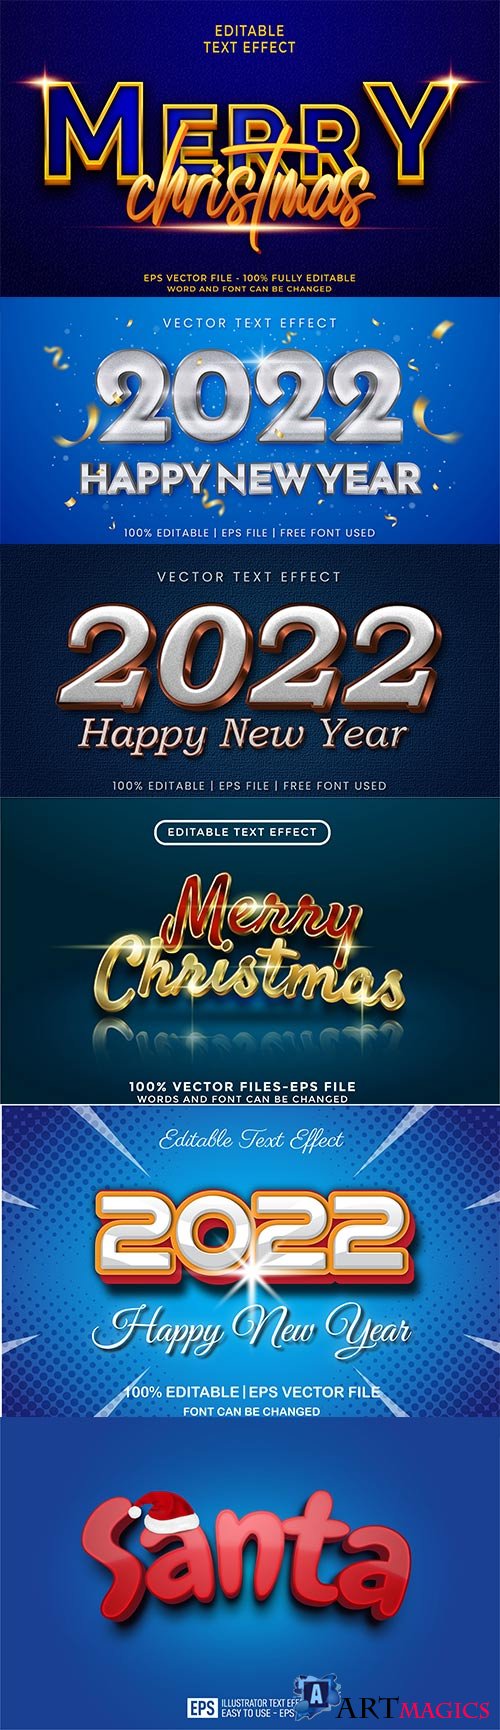 2022 New year and christmas editable text effect vector vol 20